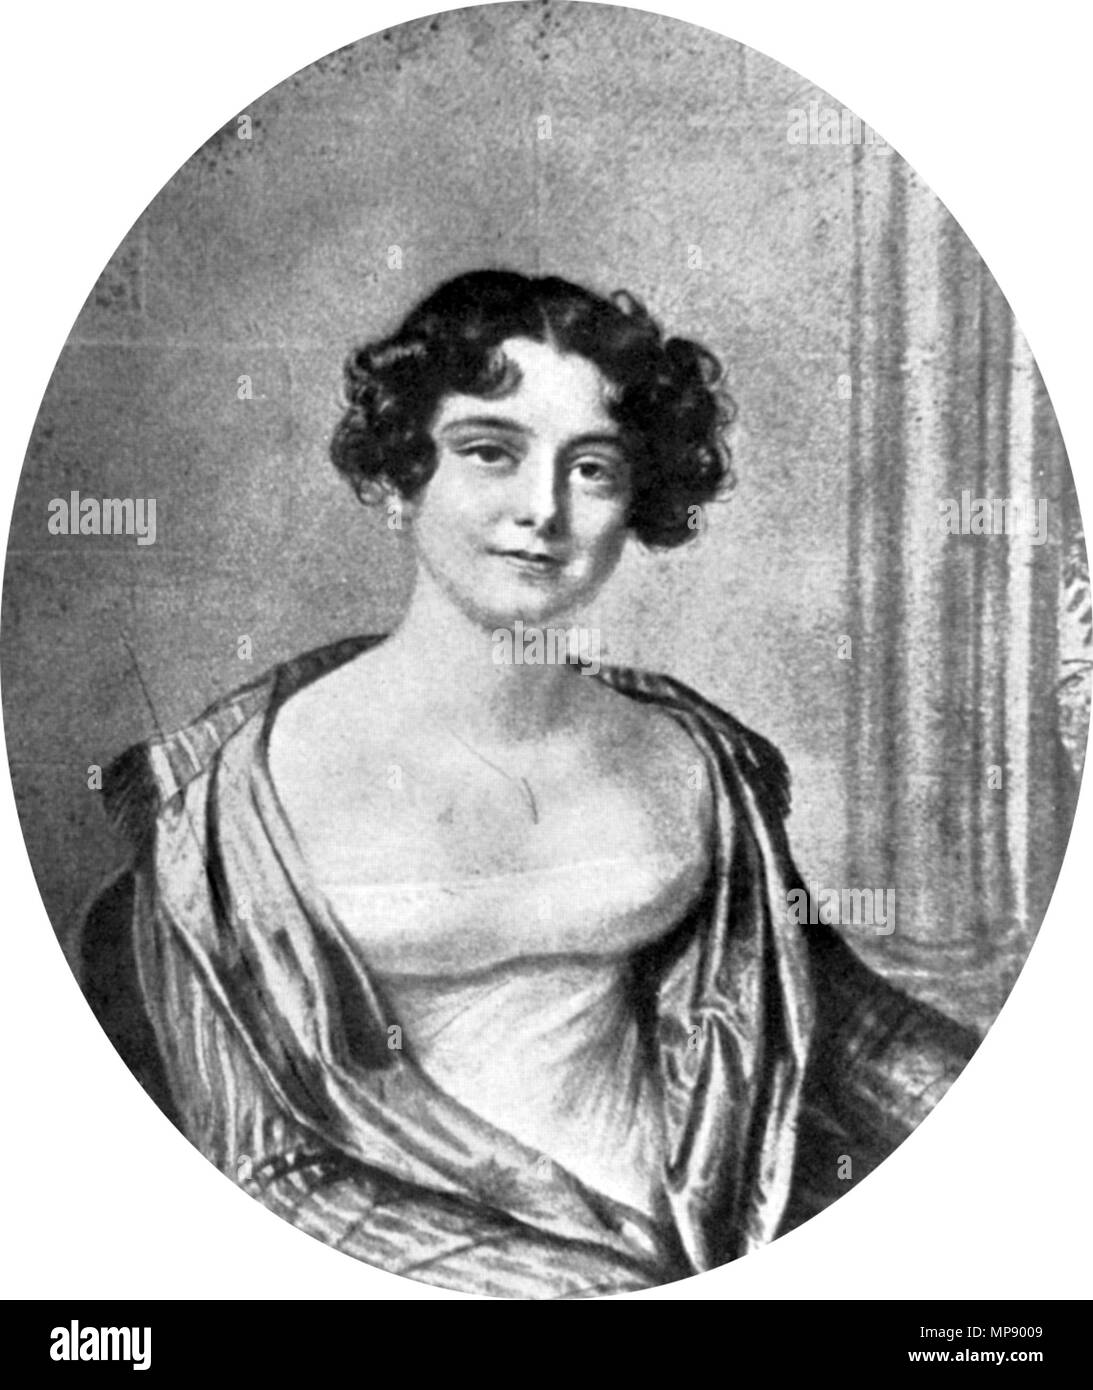 . Jane Griffin, aged 24. Later Lady Jane Franklin. Lithograph by Joseph ...